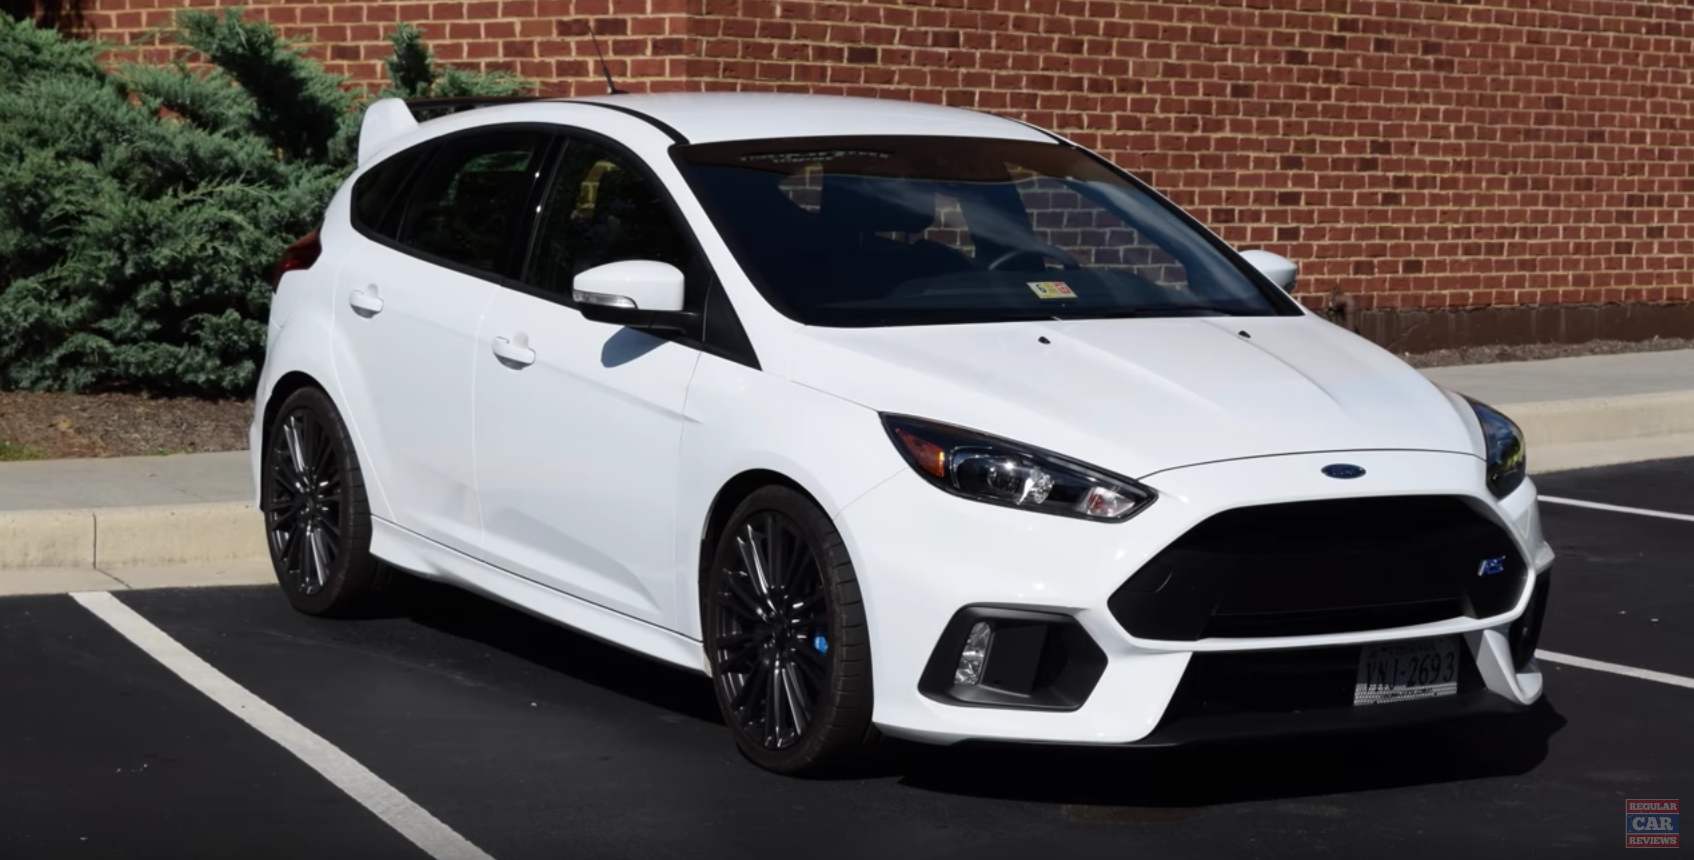 Is the Ford Focus a Good Car?